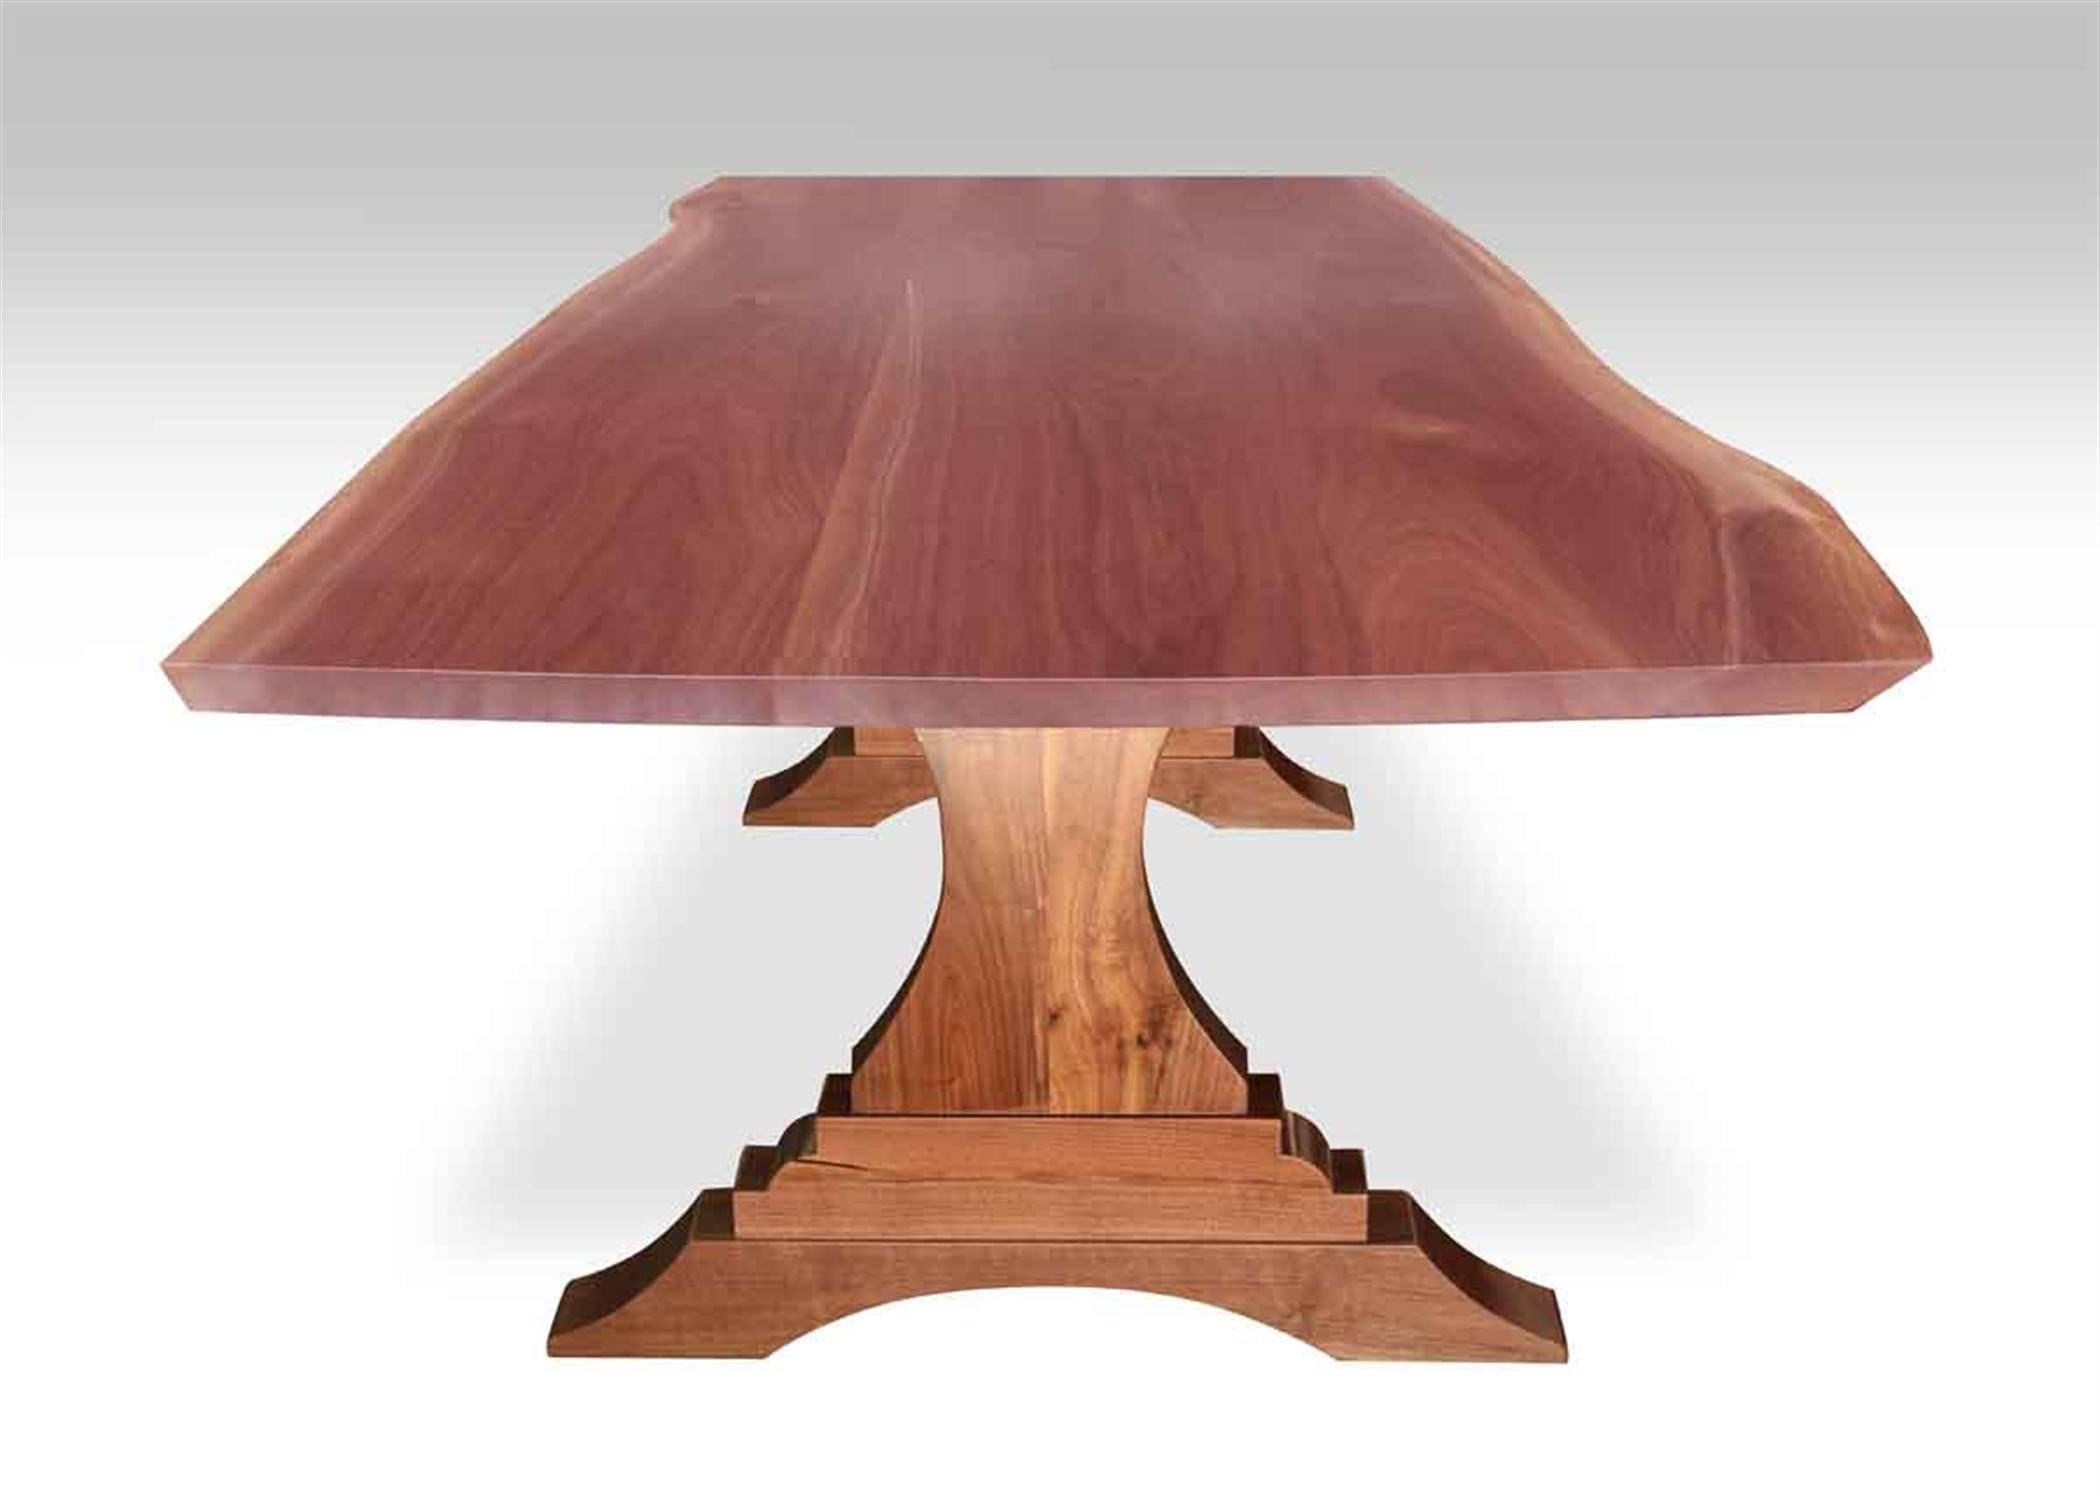 Custom made out of solid walnut with smoothed natural tree trunk edges. Lacquer finish or oil finish available. Please note since each table is custom built, each table varies slightly due to the natural grain of the wood in look and shape.